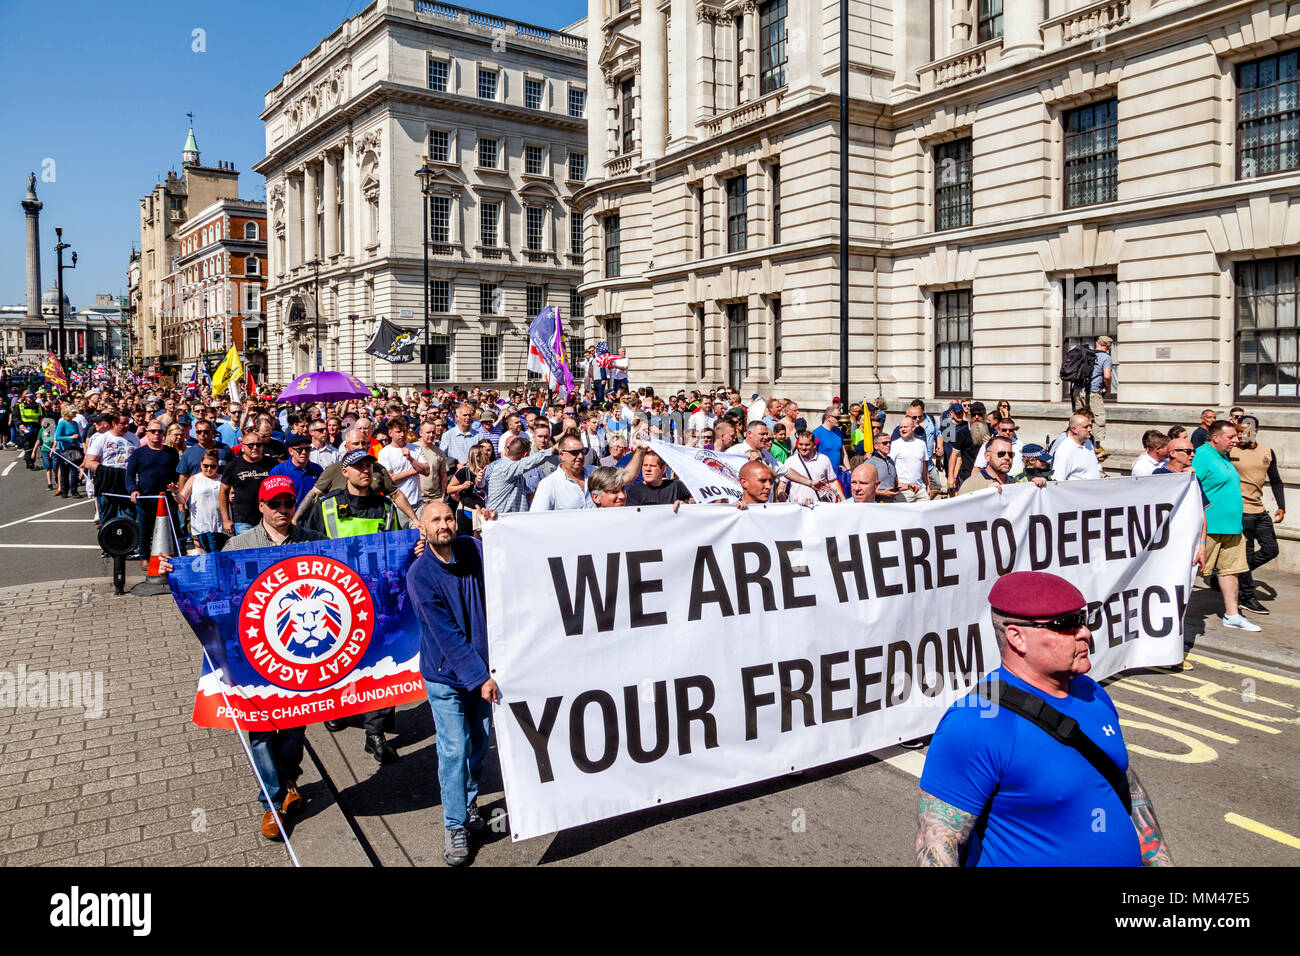 People from across the Uk take part in a freedom of speech rally in Whitehall, organised by the right wing activist Tommy Robinson, London, UK Stock Photo